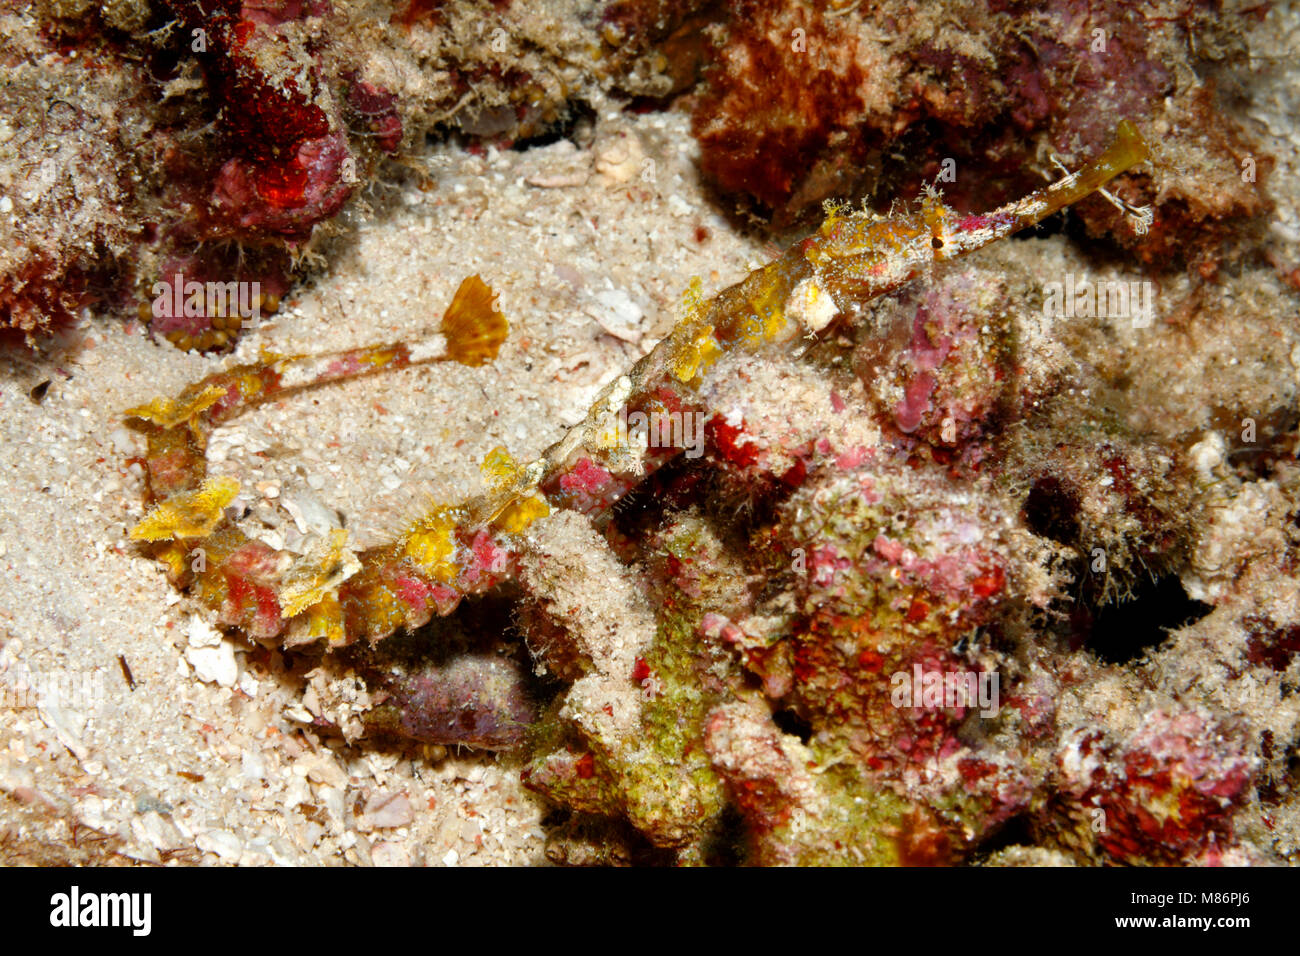 Winged Pipefish, Halicampus macrorhynchus. Also known as Ornate Pipefish and Whiskered Pipefish. Stock Photo